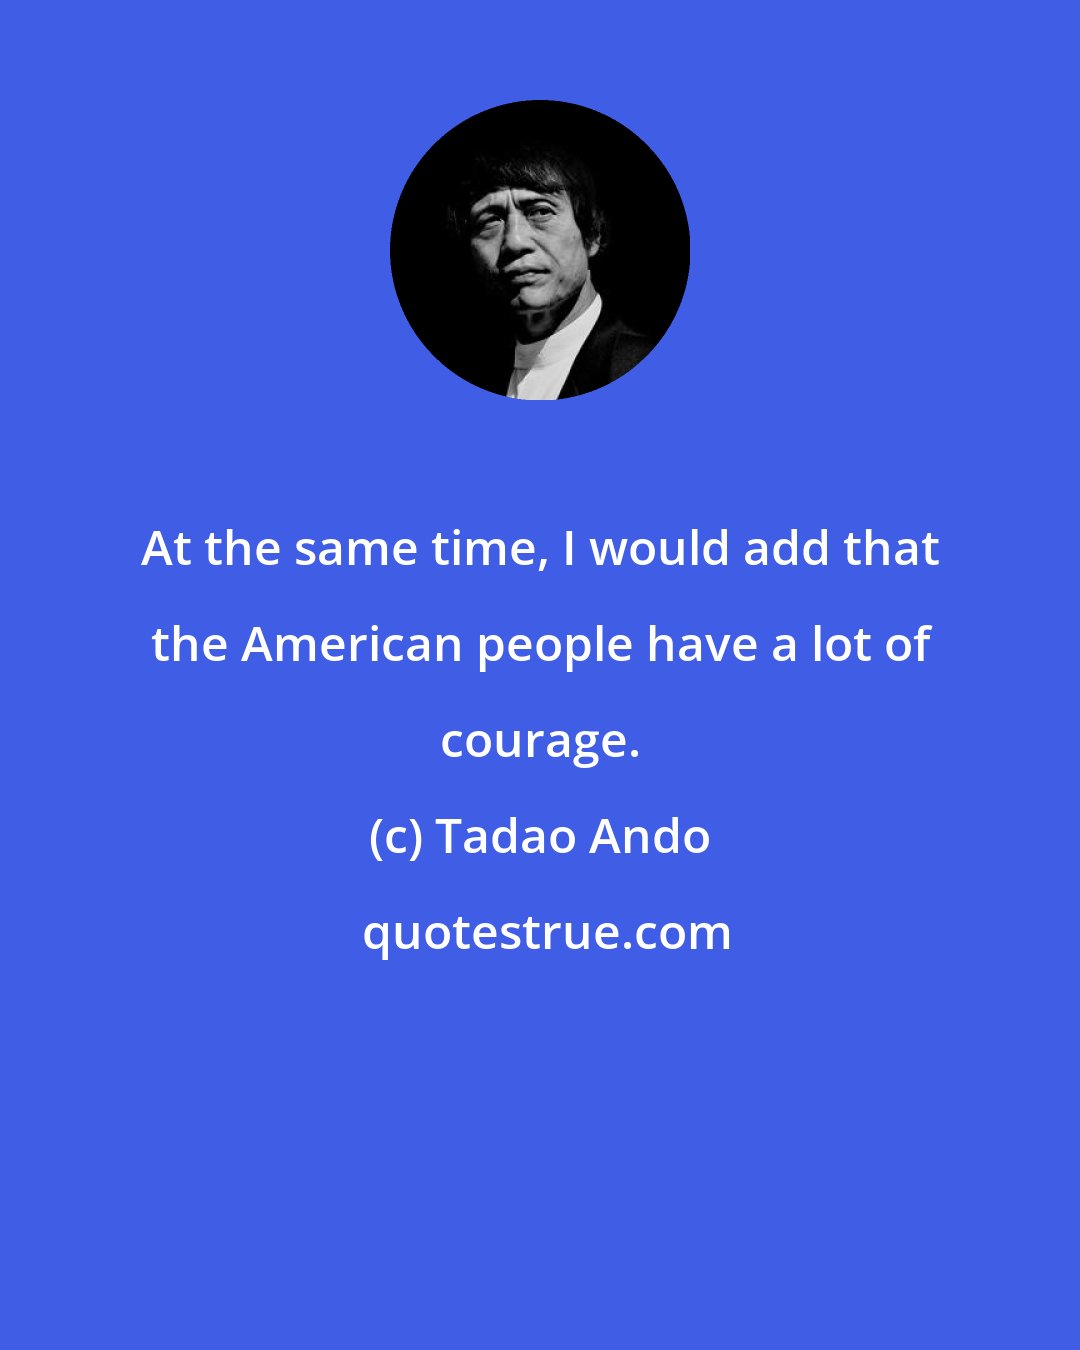 Tadao Ando: At the same time, I would add that the American people have a lot of courage.